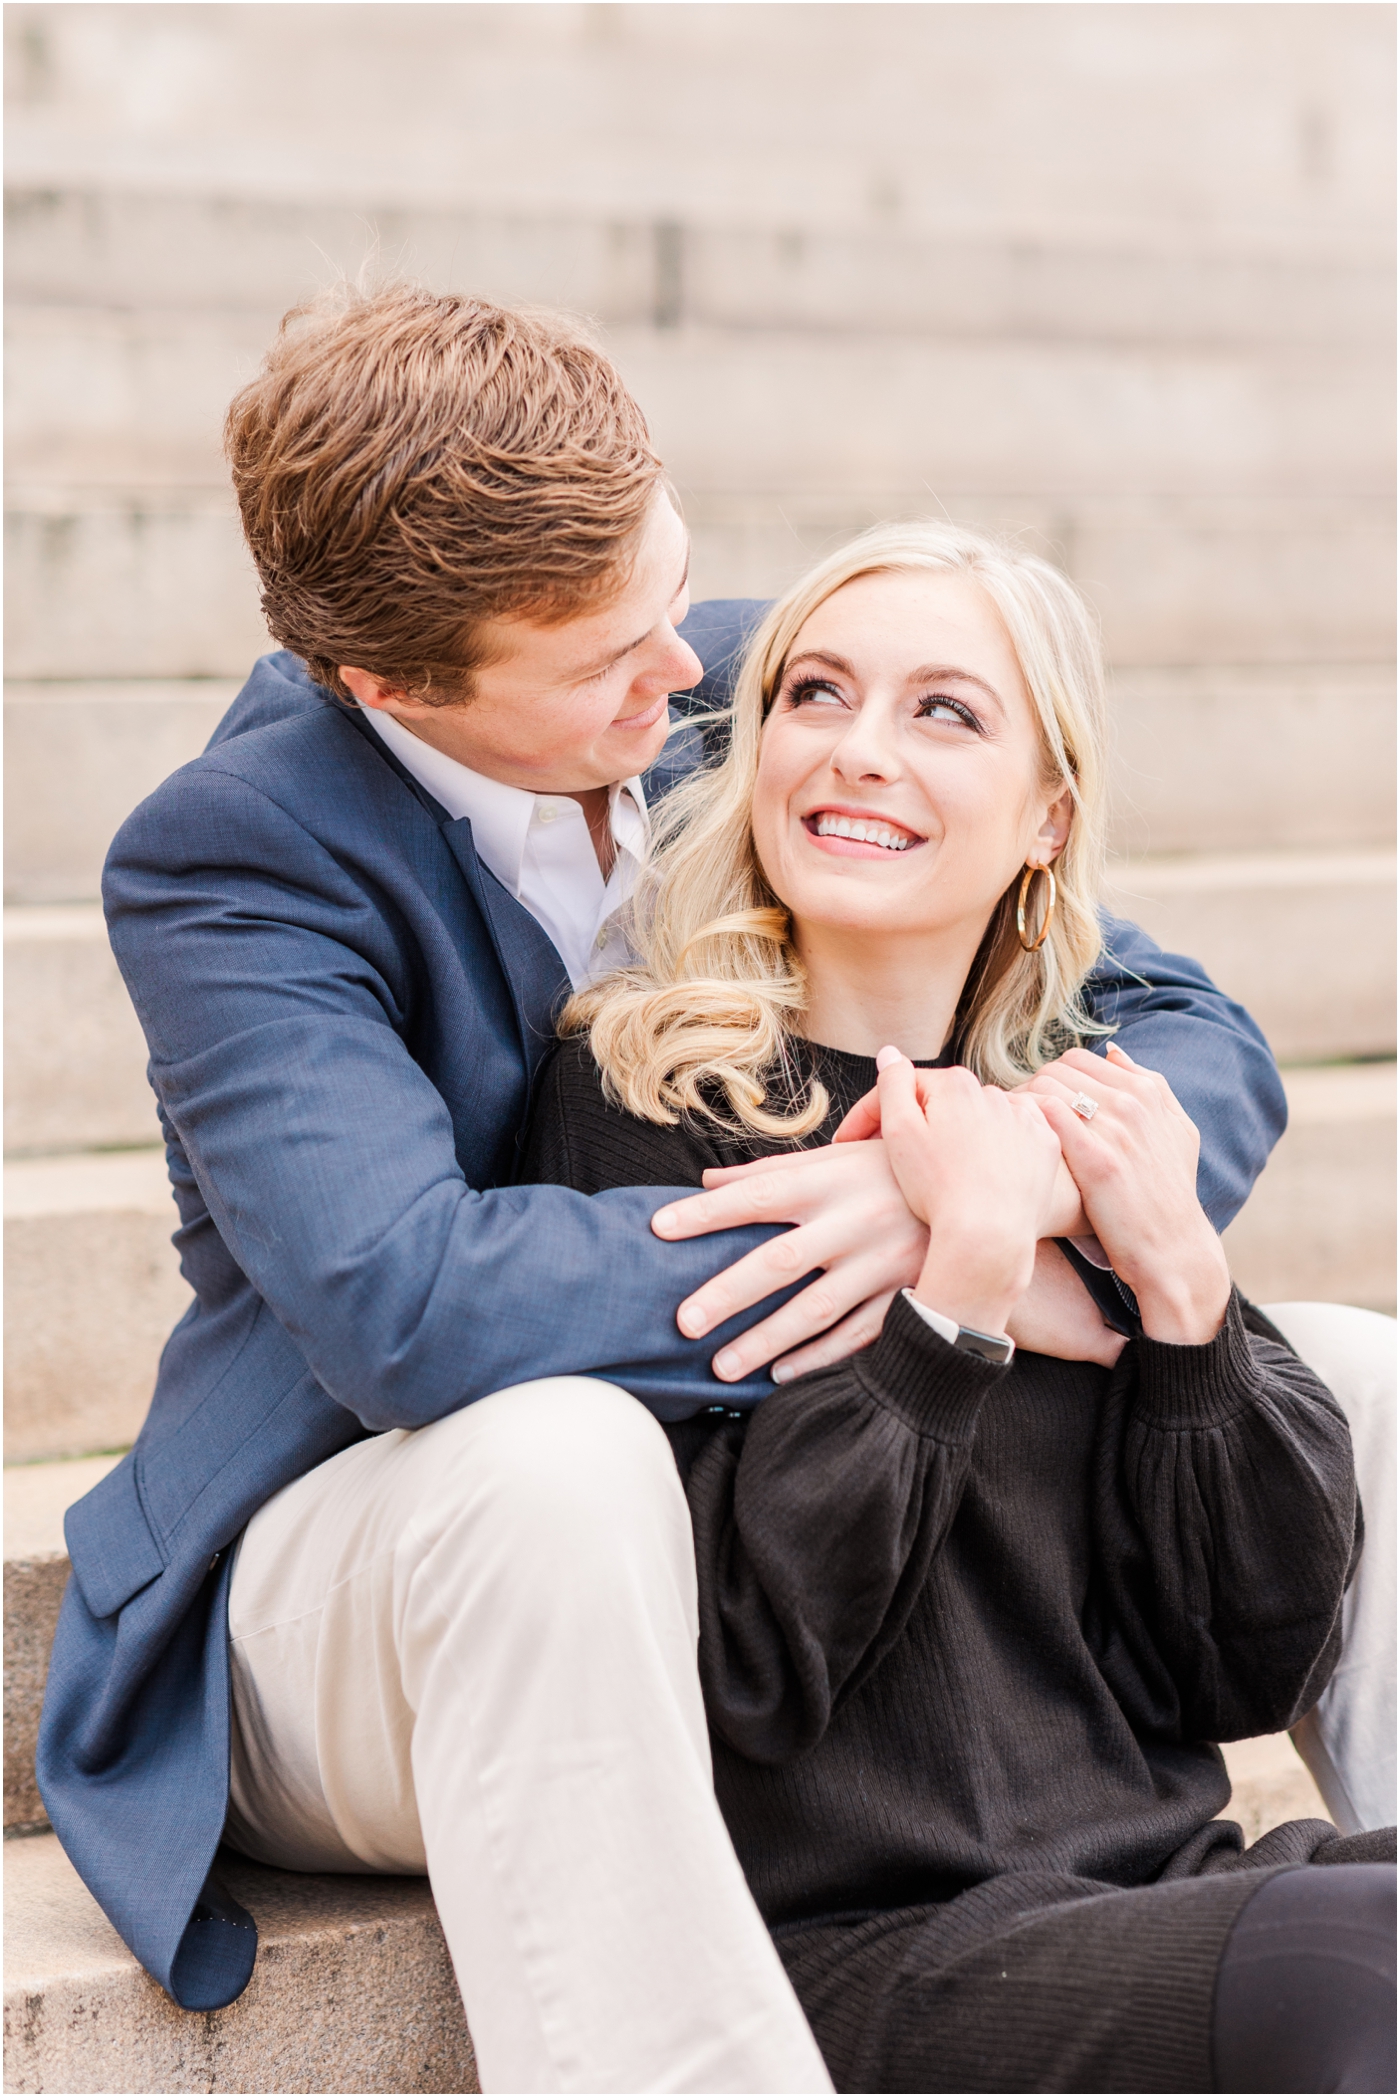 Downtown Greenville engagement session at grace church downtown